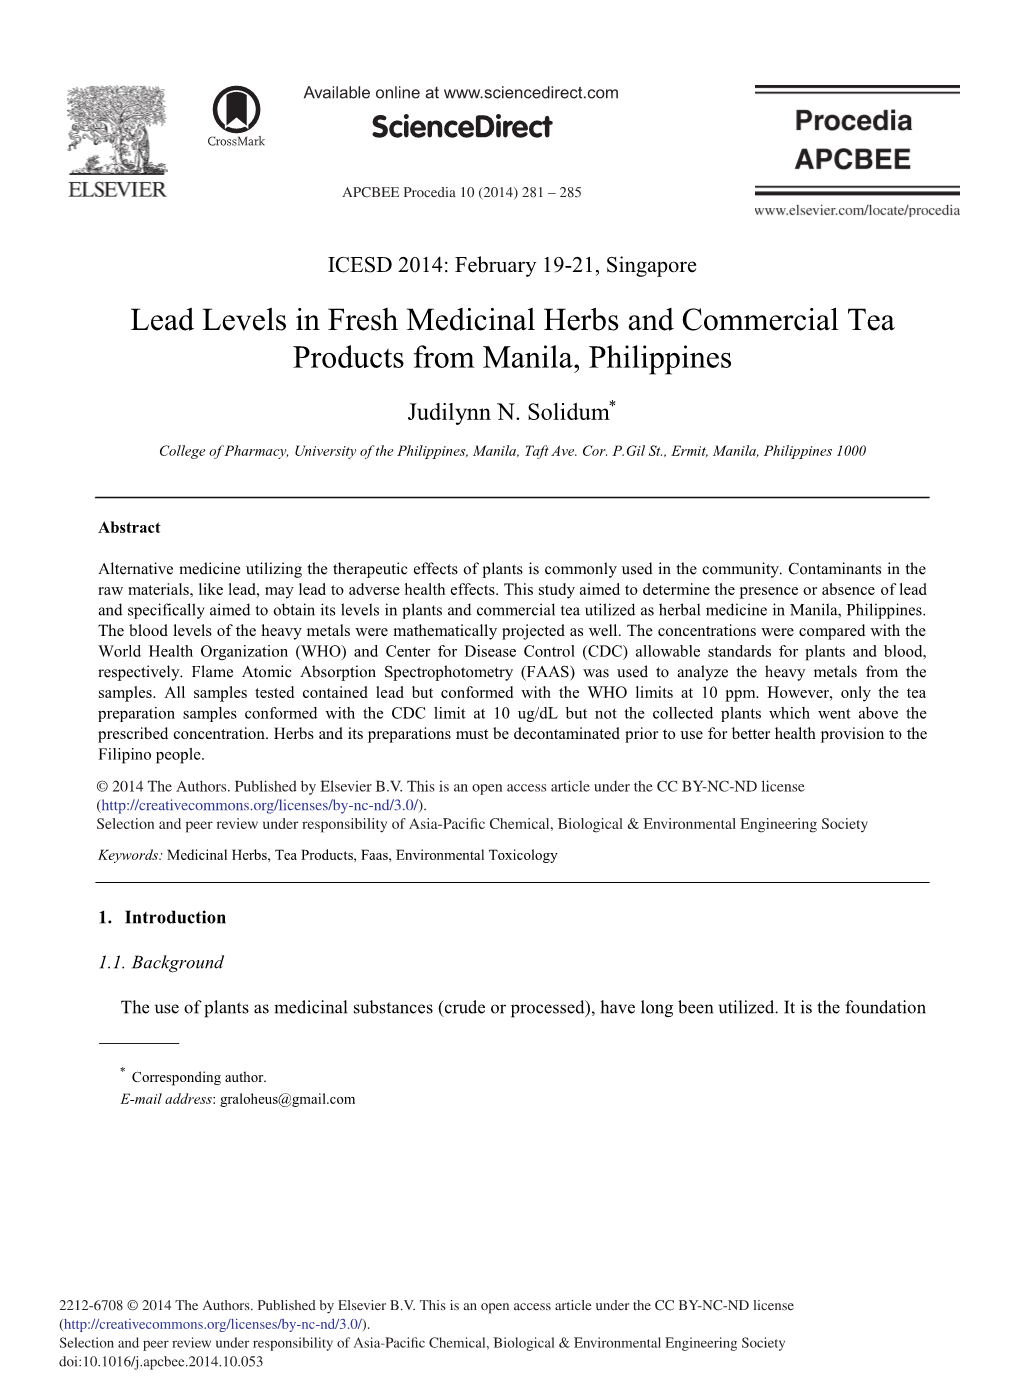 Lead Levels in Fresh Medicinal Herbs and Commercial Tea Products from Manila, Philippines